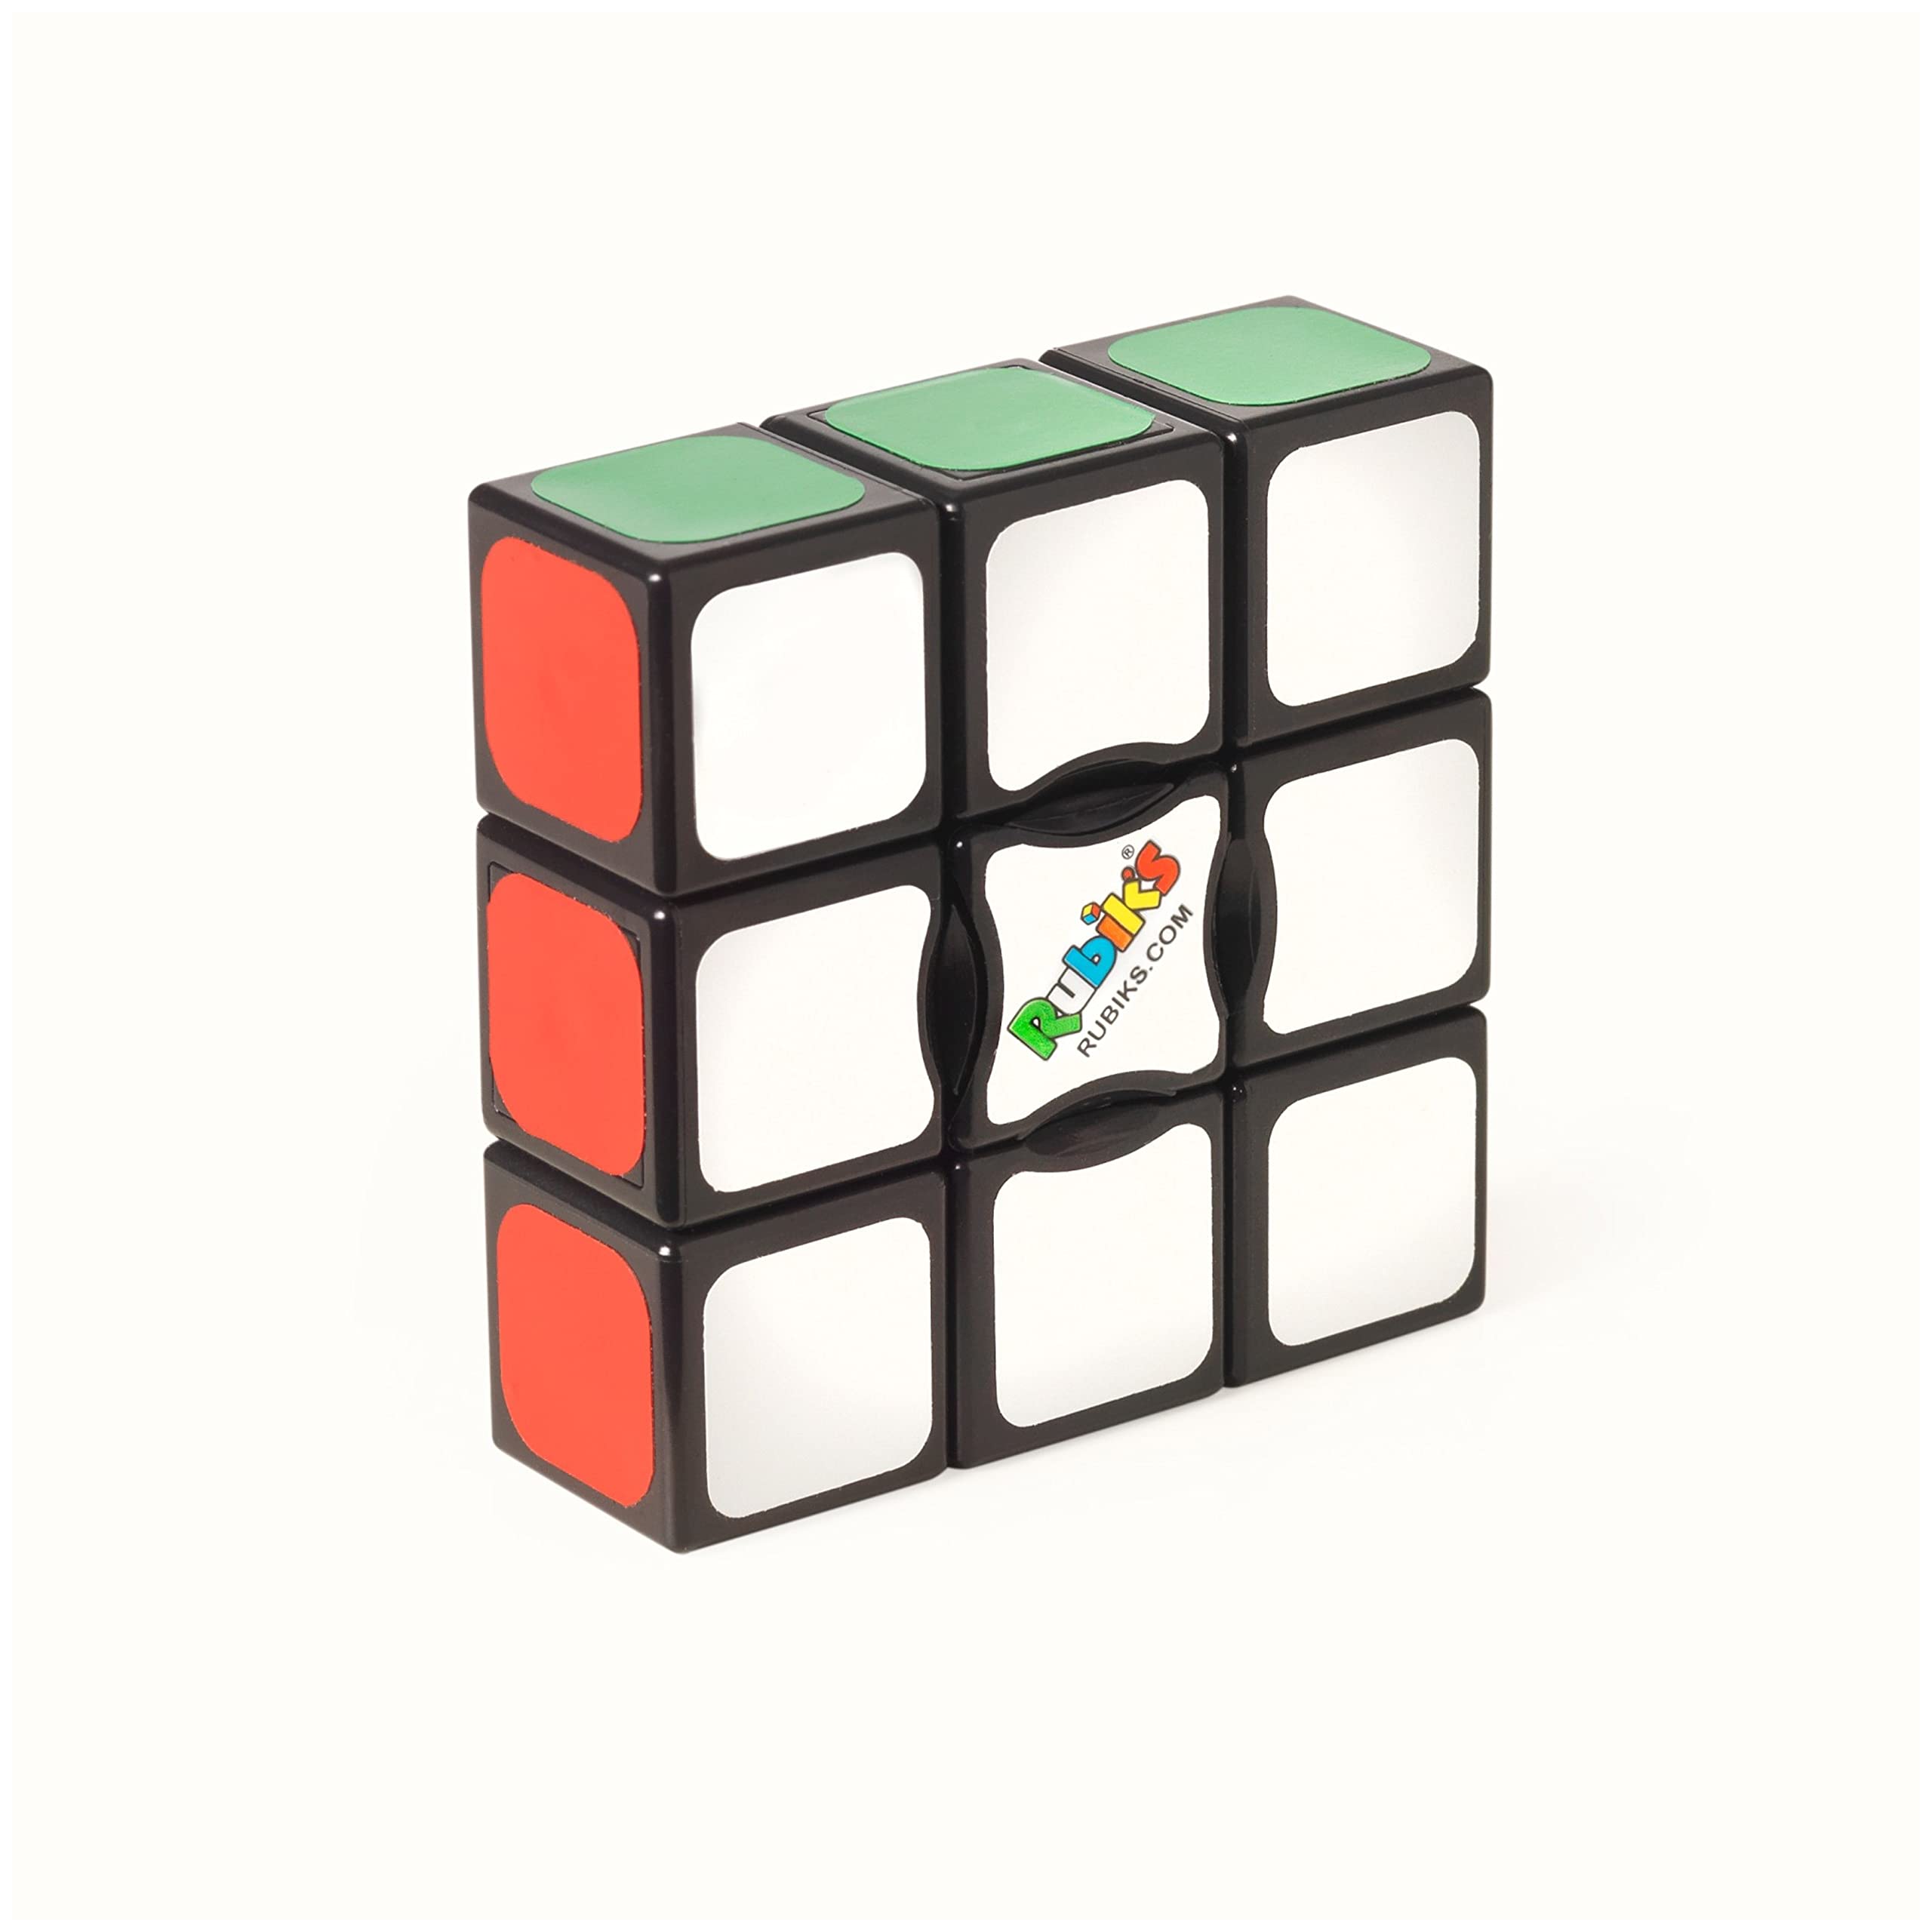 Rubik's Cube at 50: How owner Spin Master is innovating iconic puzzle